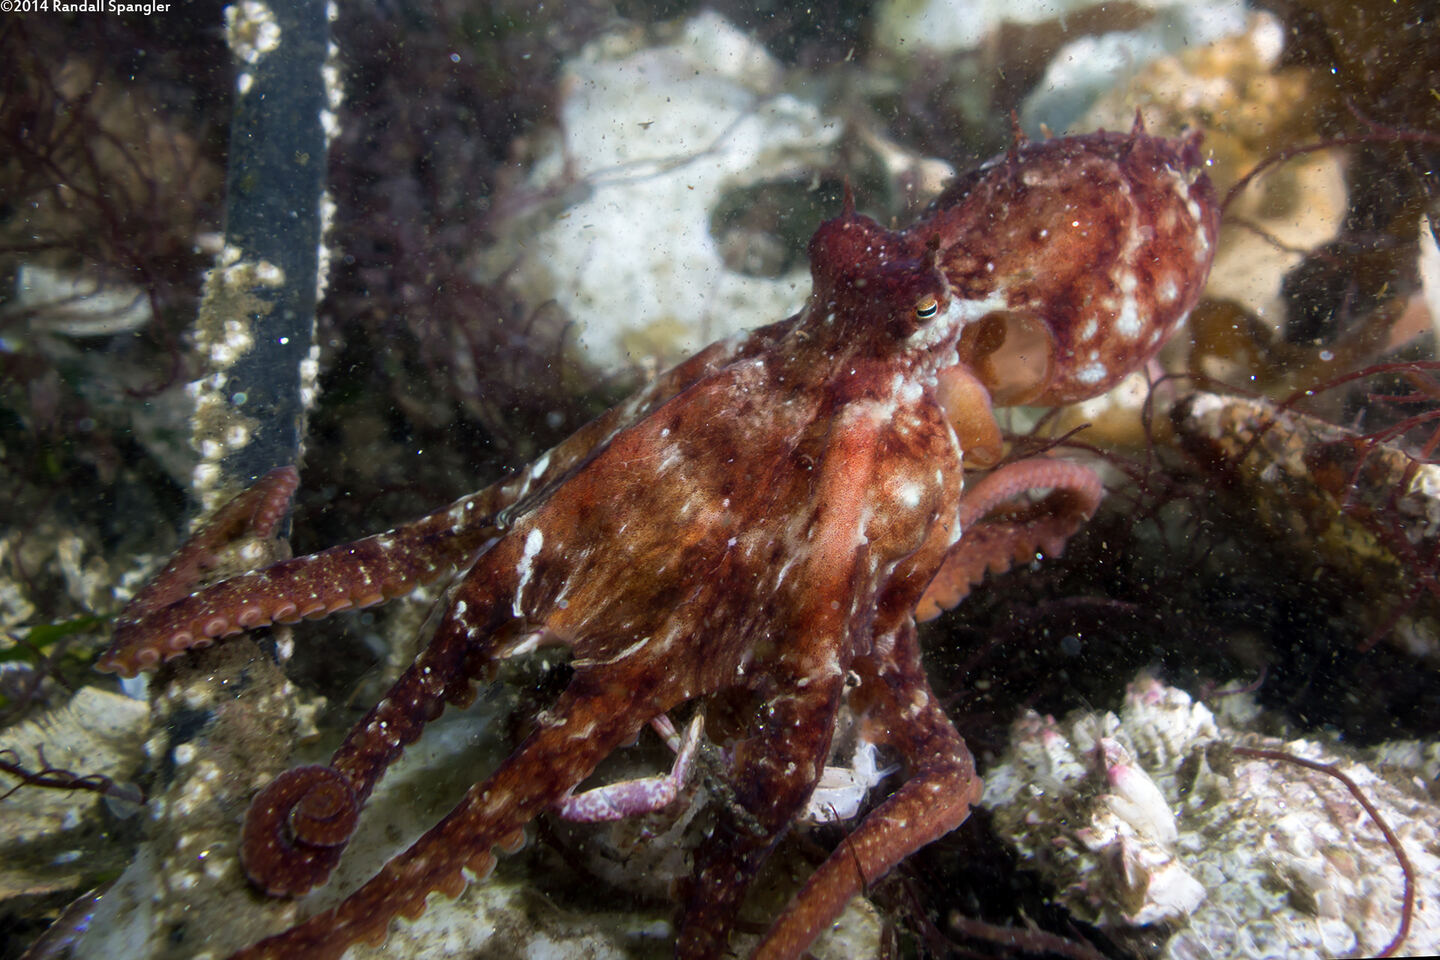 Octopus rubescens (Red Octopus); This one caught a crab